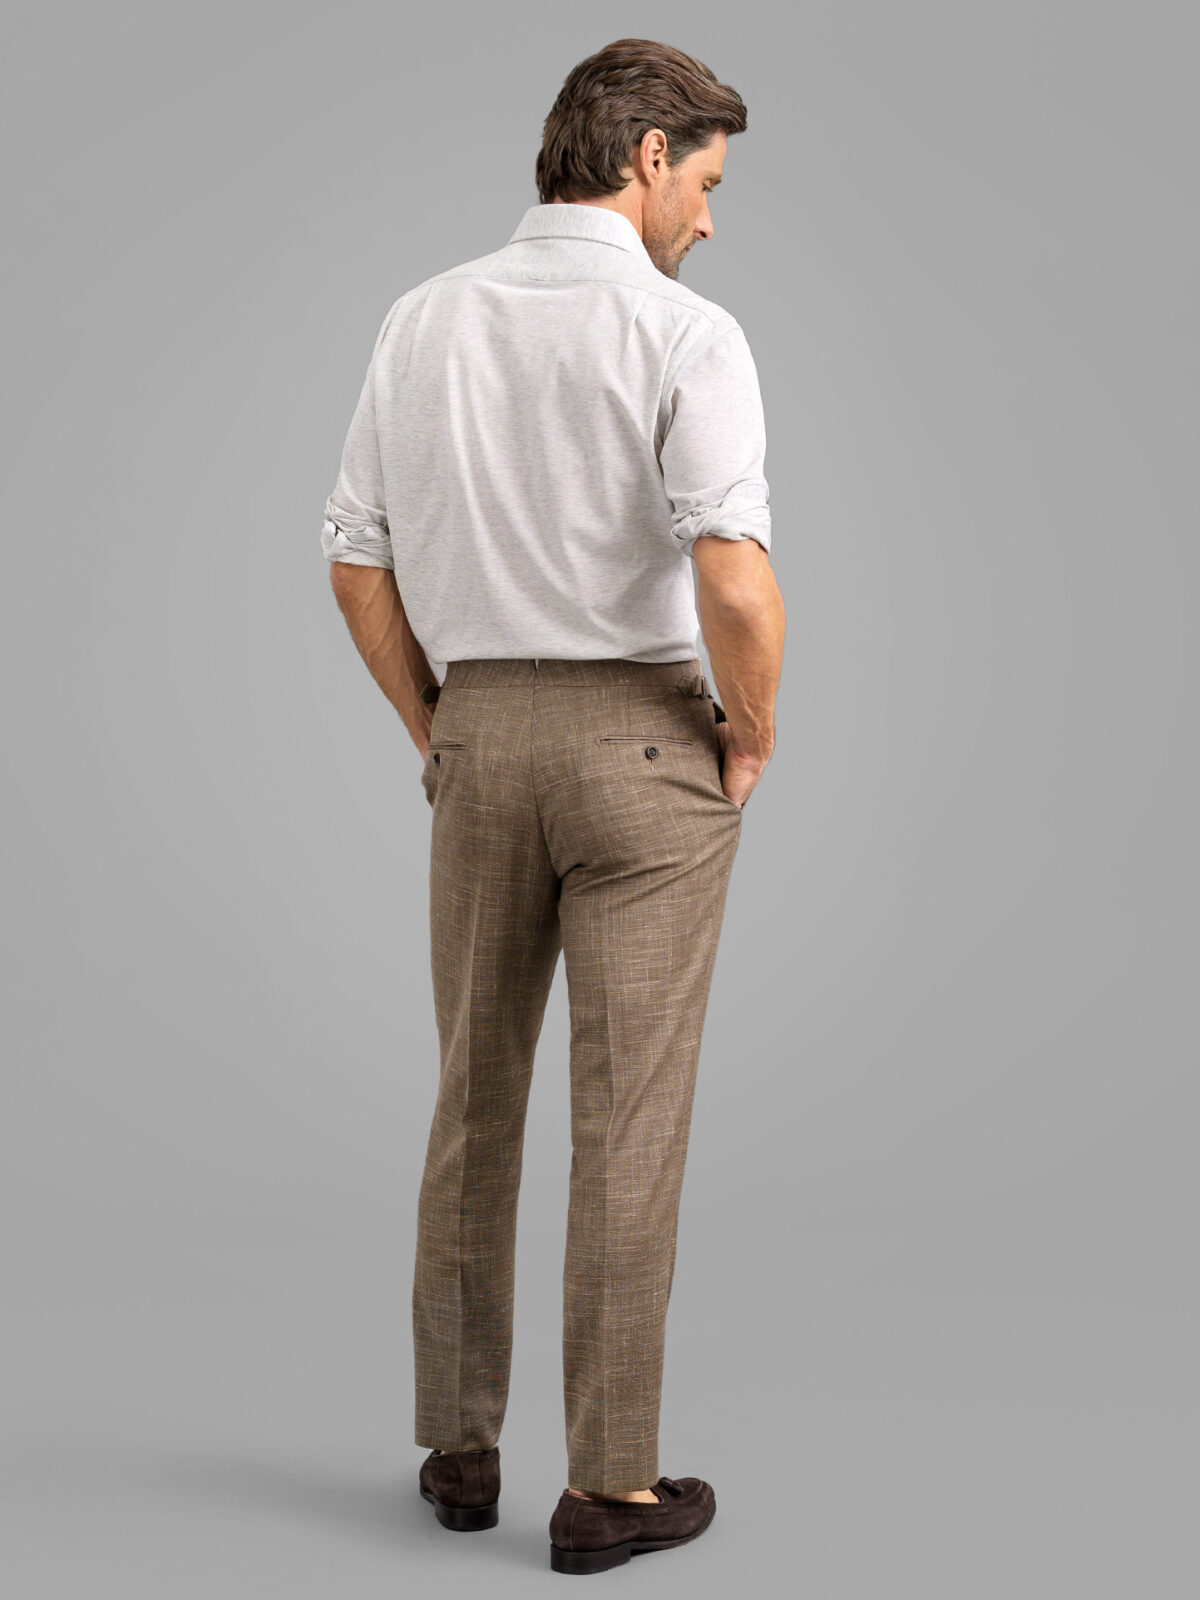 Mocha Wool and Linen Stretch Dress Pant - Custom Fit Tailored Clothing